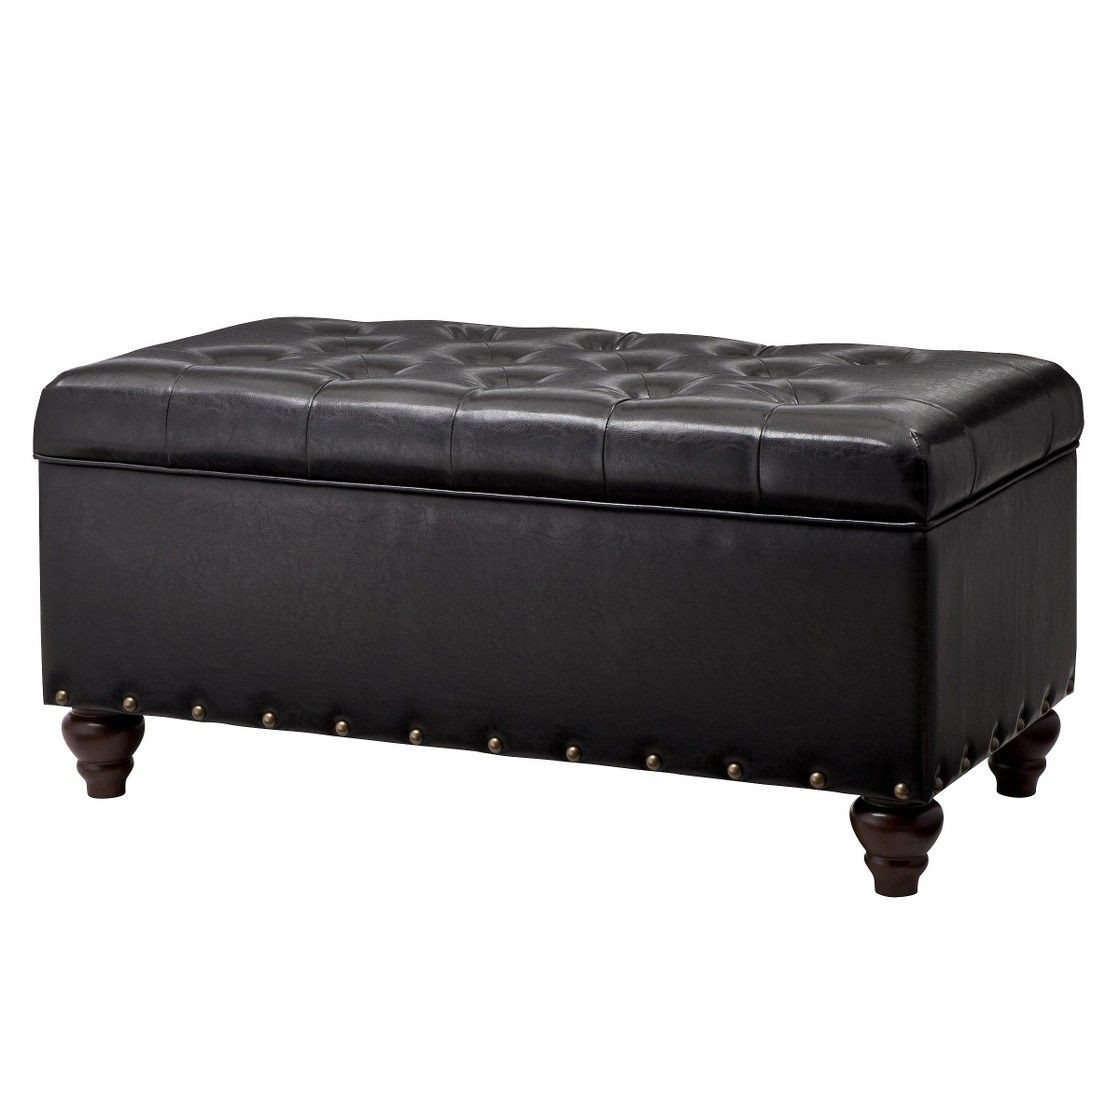 Tufted Storage Bench Target
 Tufted Ottoman Bench with Shoe Storage and Nailhead Black